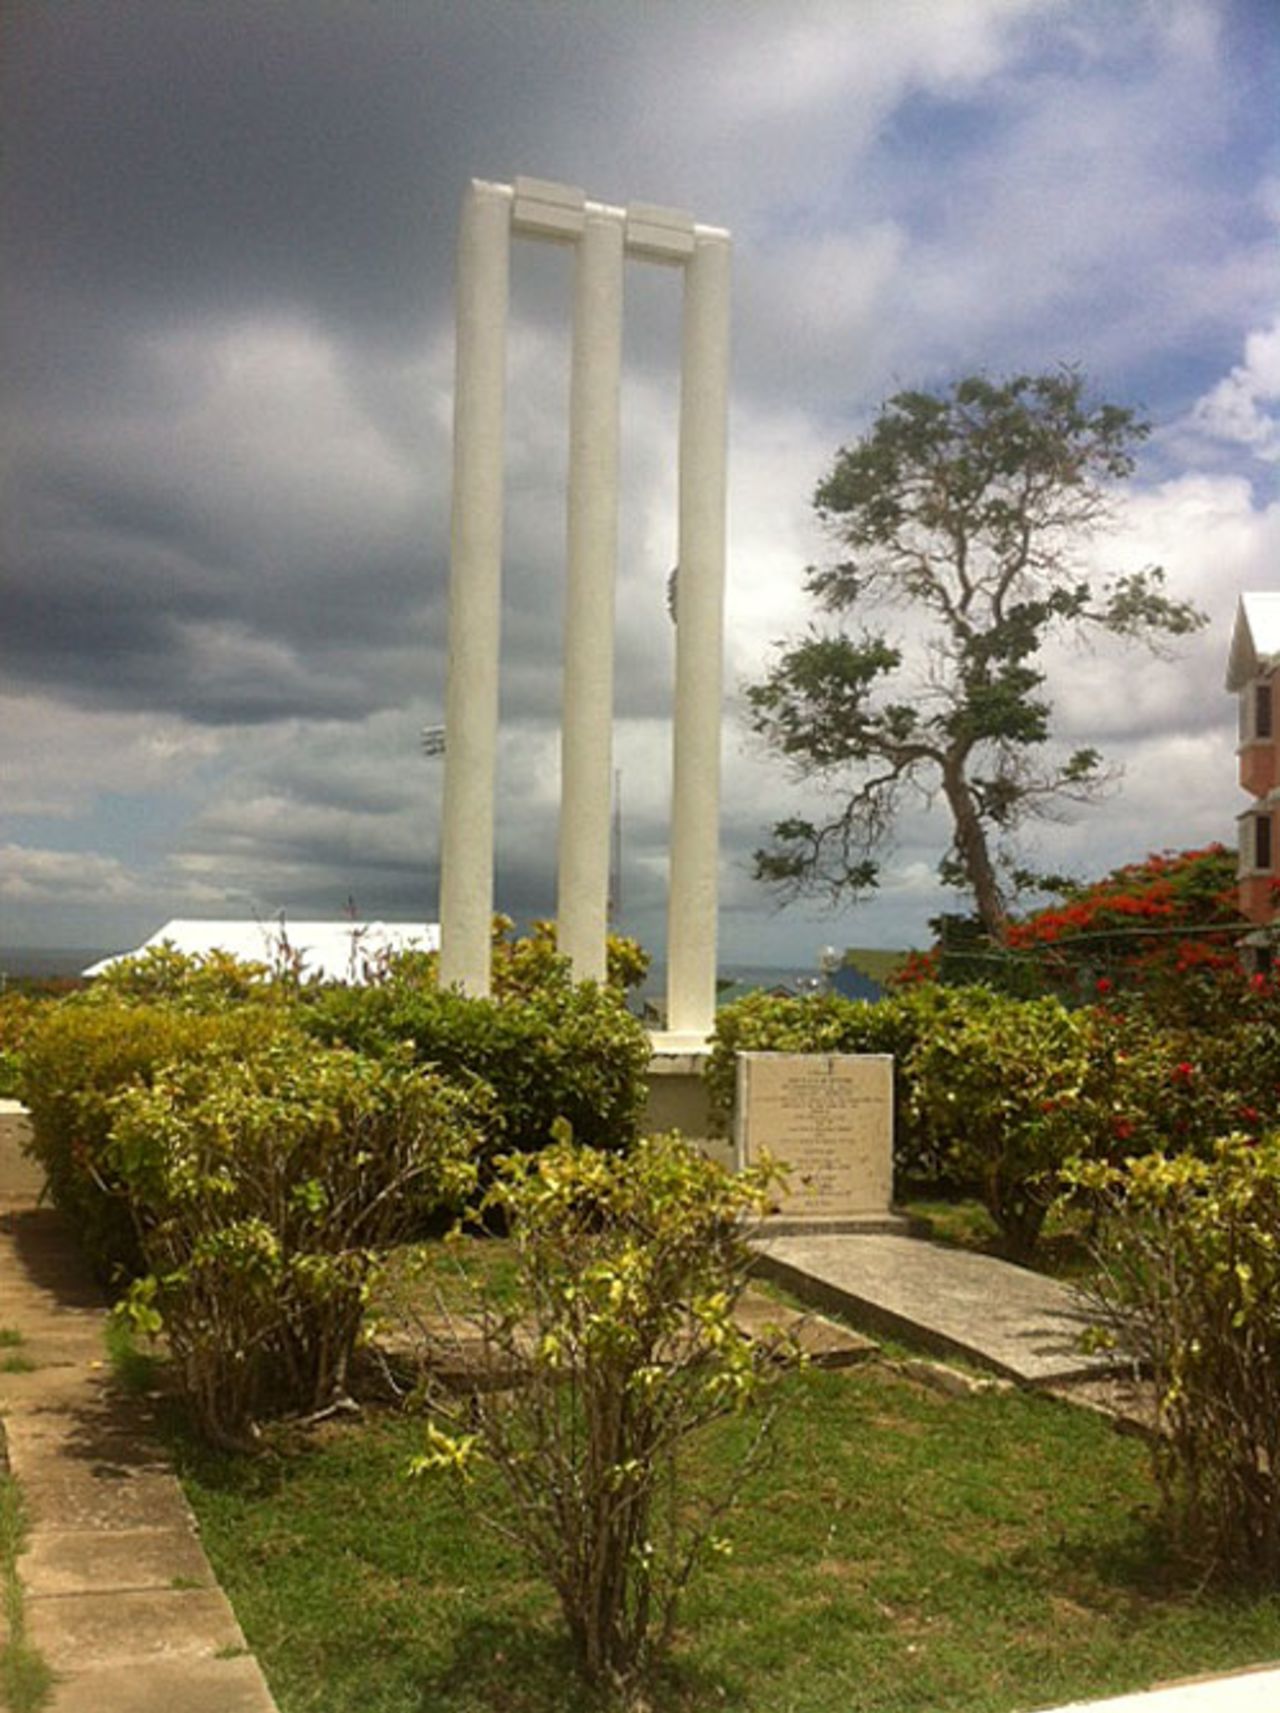 Sir Frank Worrell's grave at the Three W's Oval, Barbados, July 26, 2014